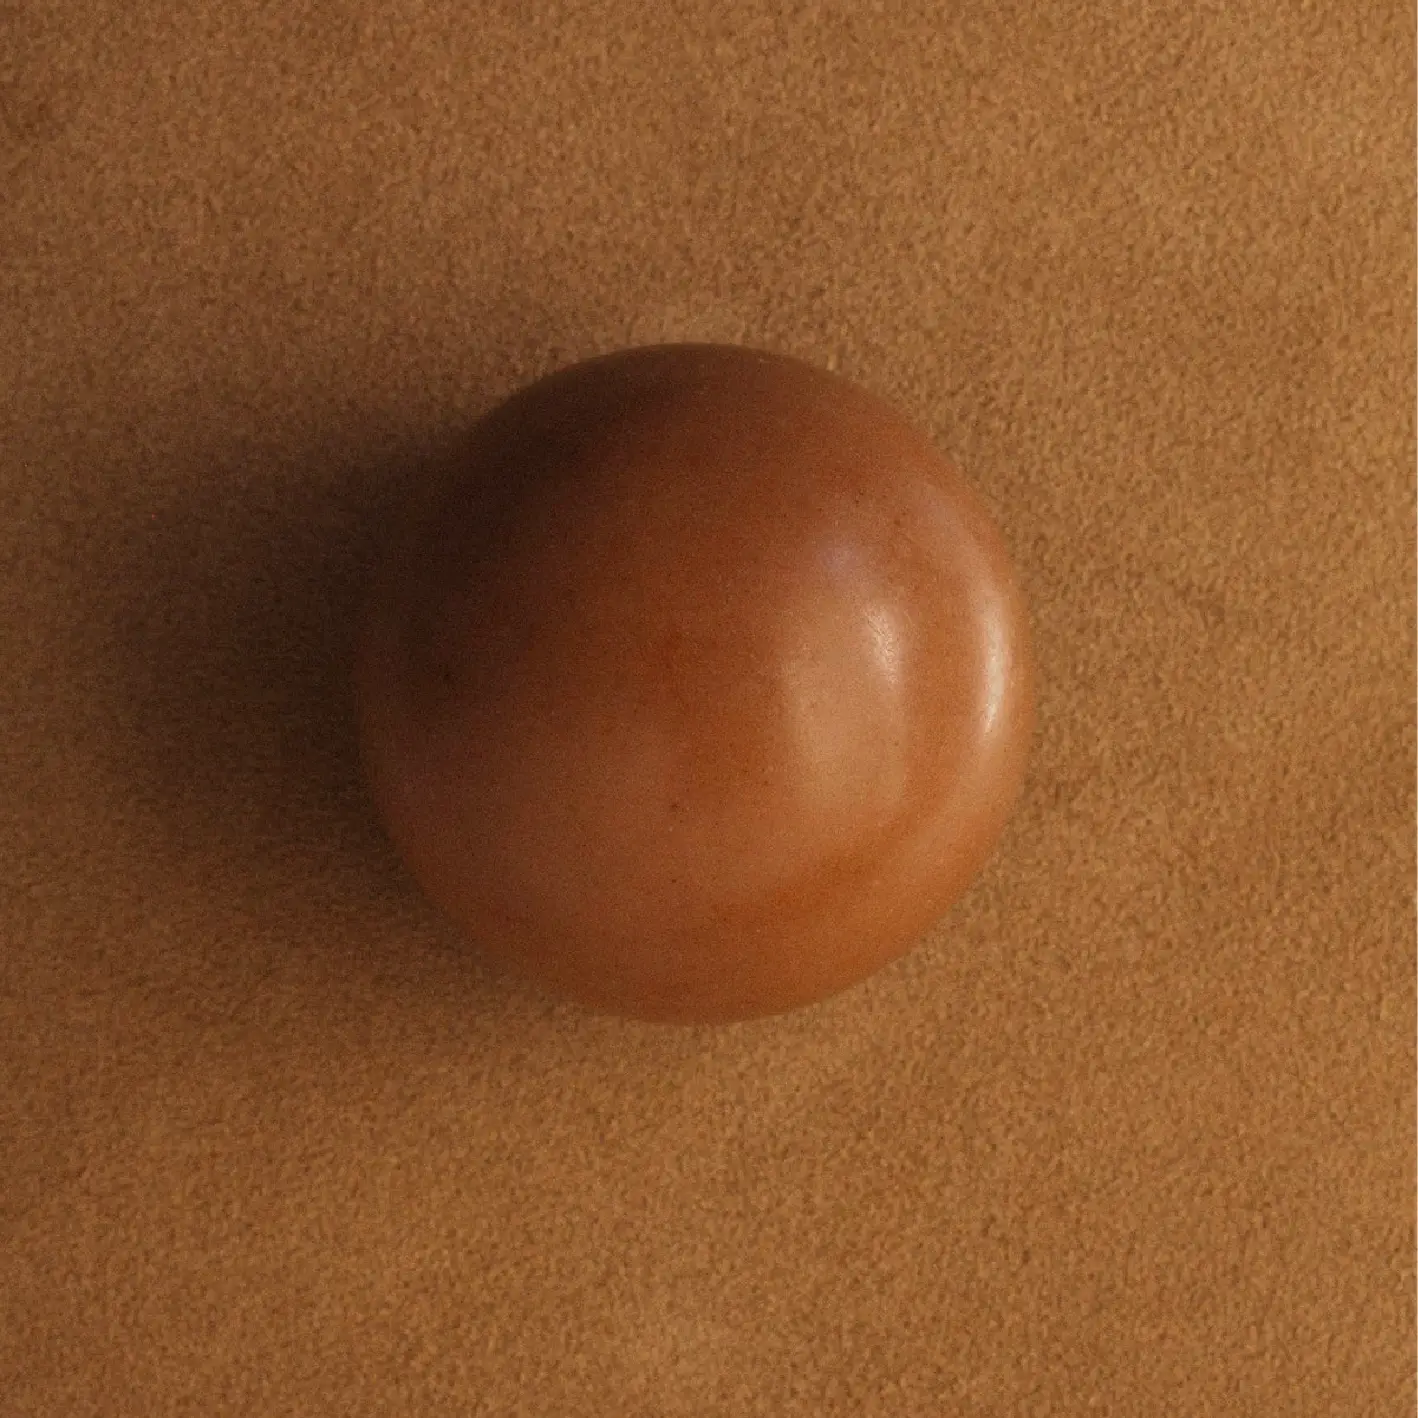 Desert Rose Red Clay Tallow Sphere Soap Delivery